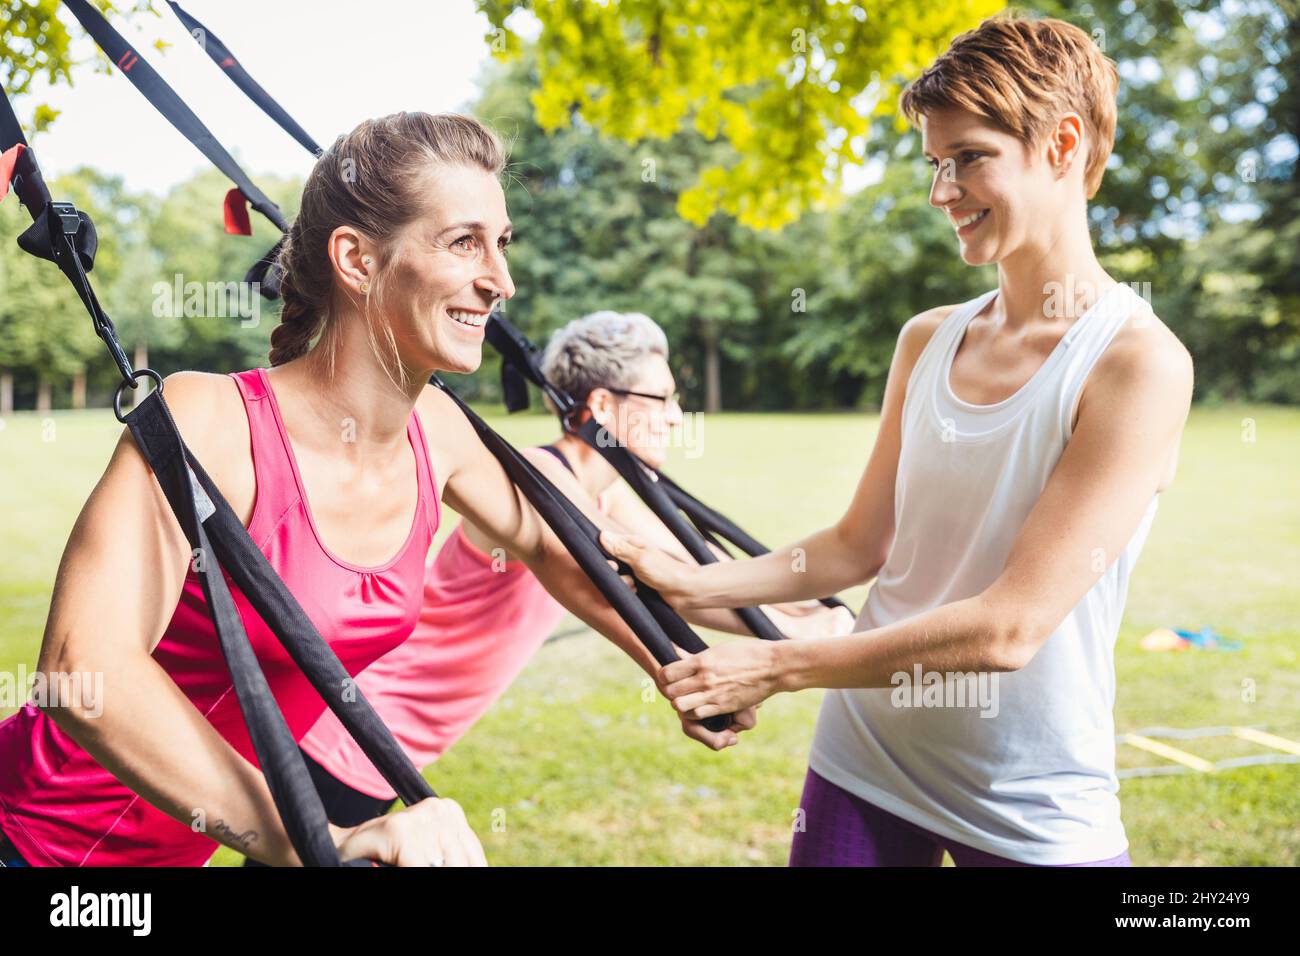 Smiling young woman exercises using suspension training Stock Photo